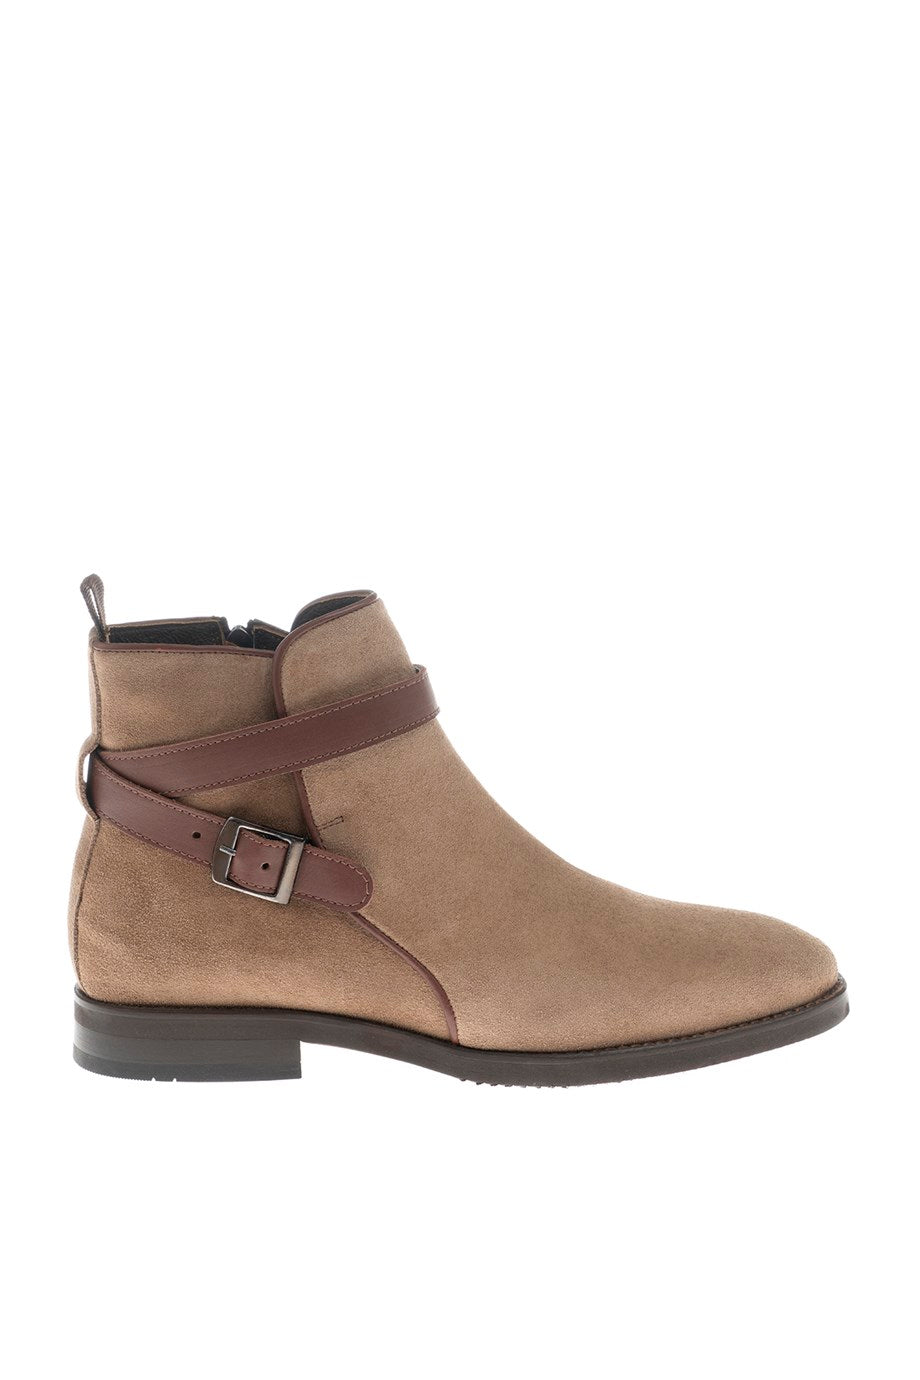 Special Design Single Buckle Detailed Suede Boots - MENSTYLEWITH